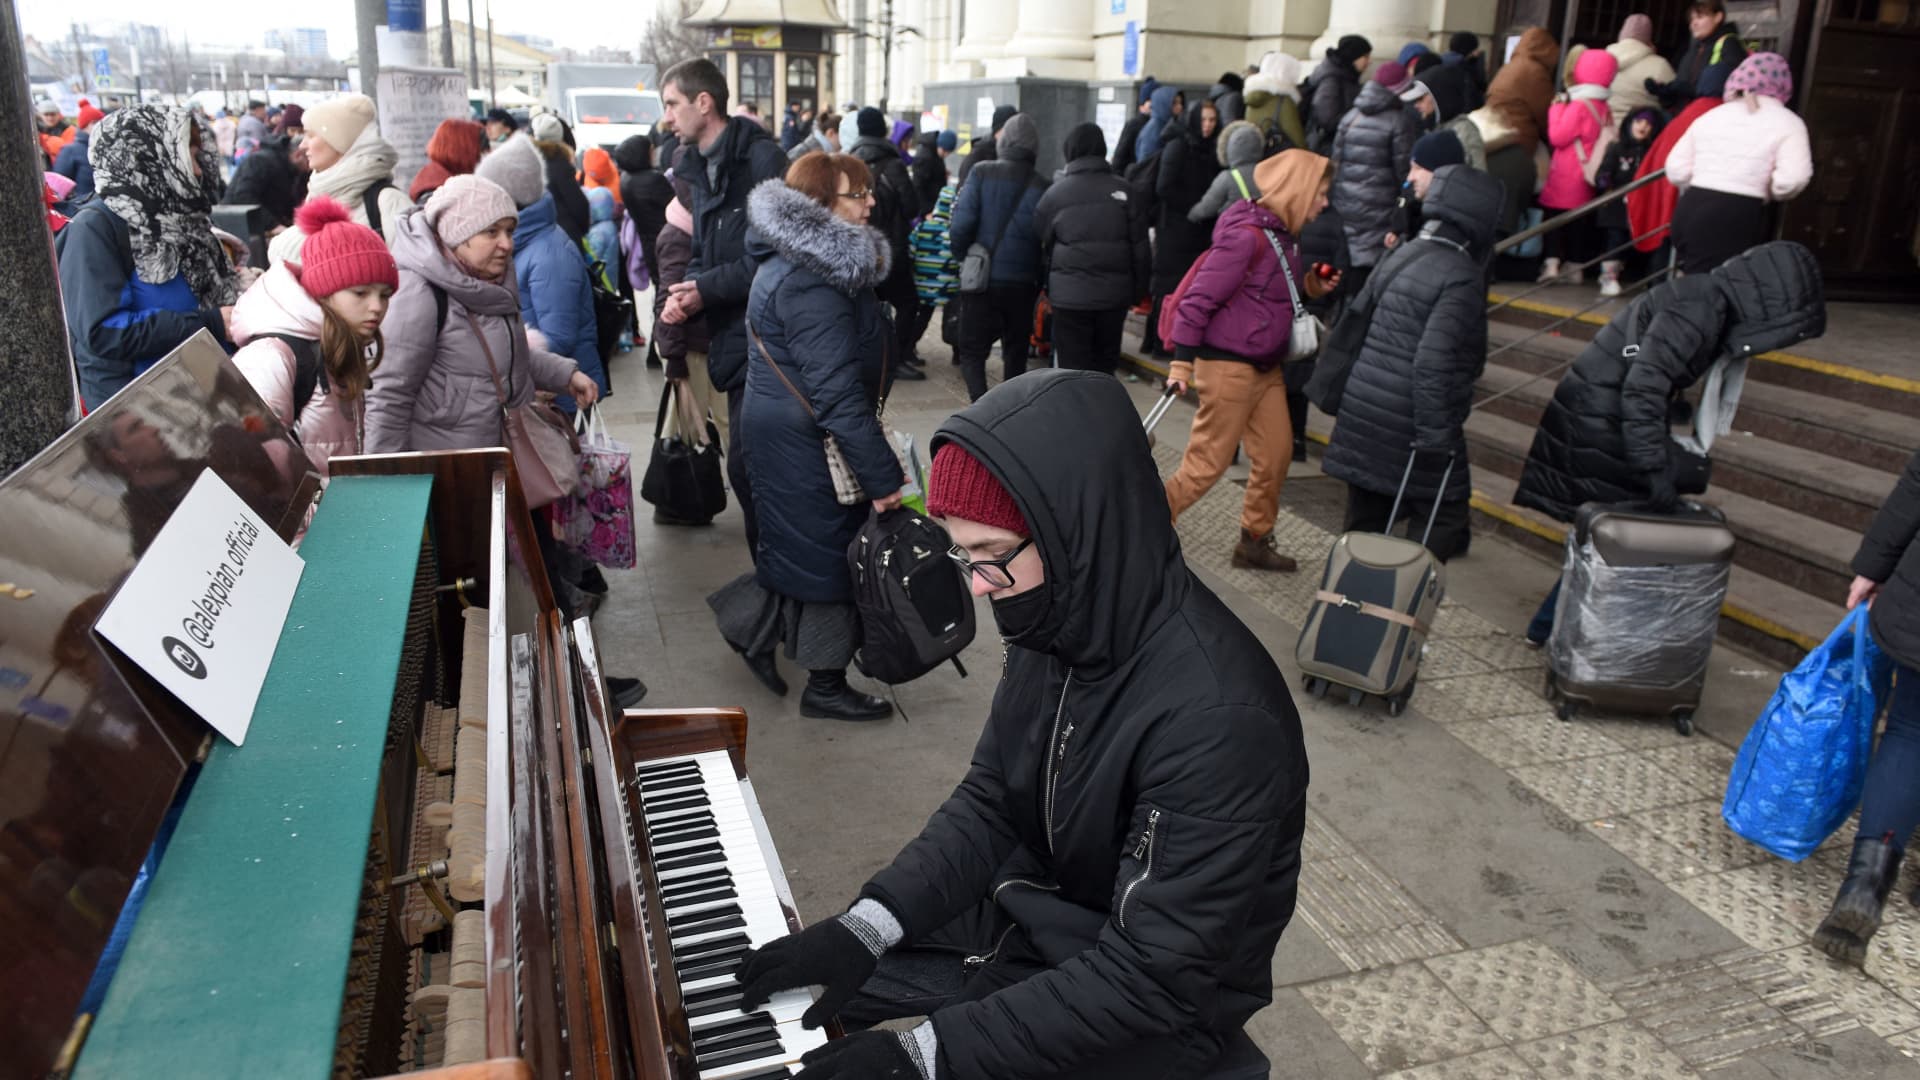 A man plays piano as people walk toward the railway station of the western Ukrainian city of Lviv on March 6, 2022, 11 days after Russia launched a military invasion on Ukraine.